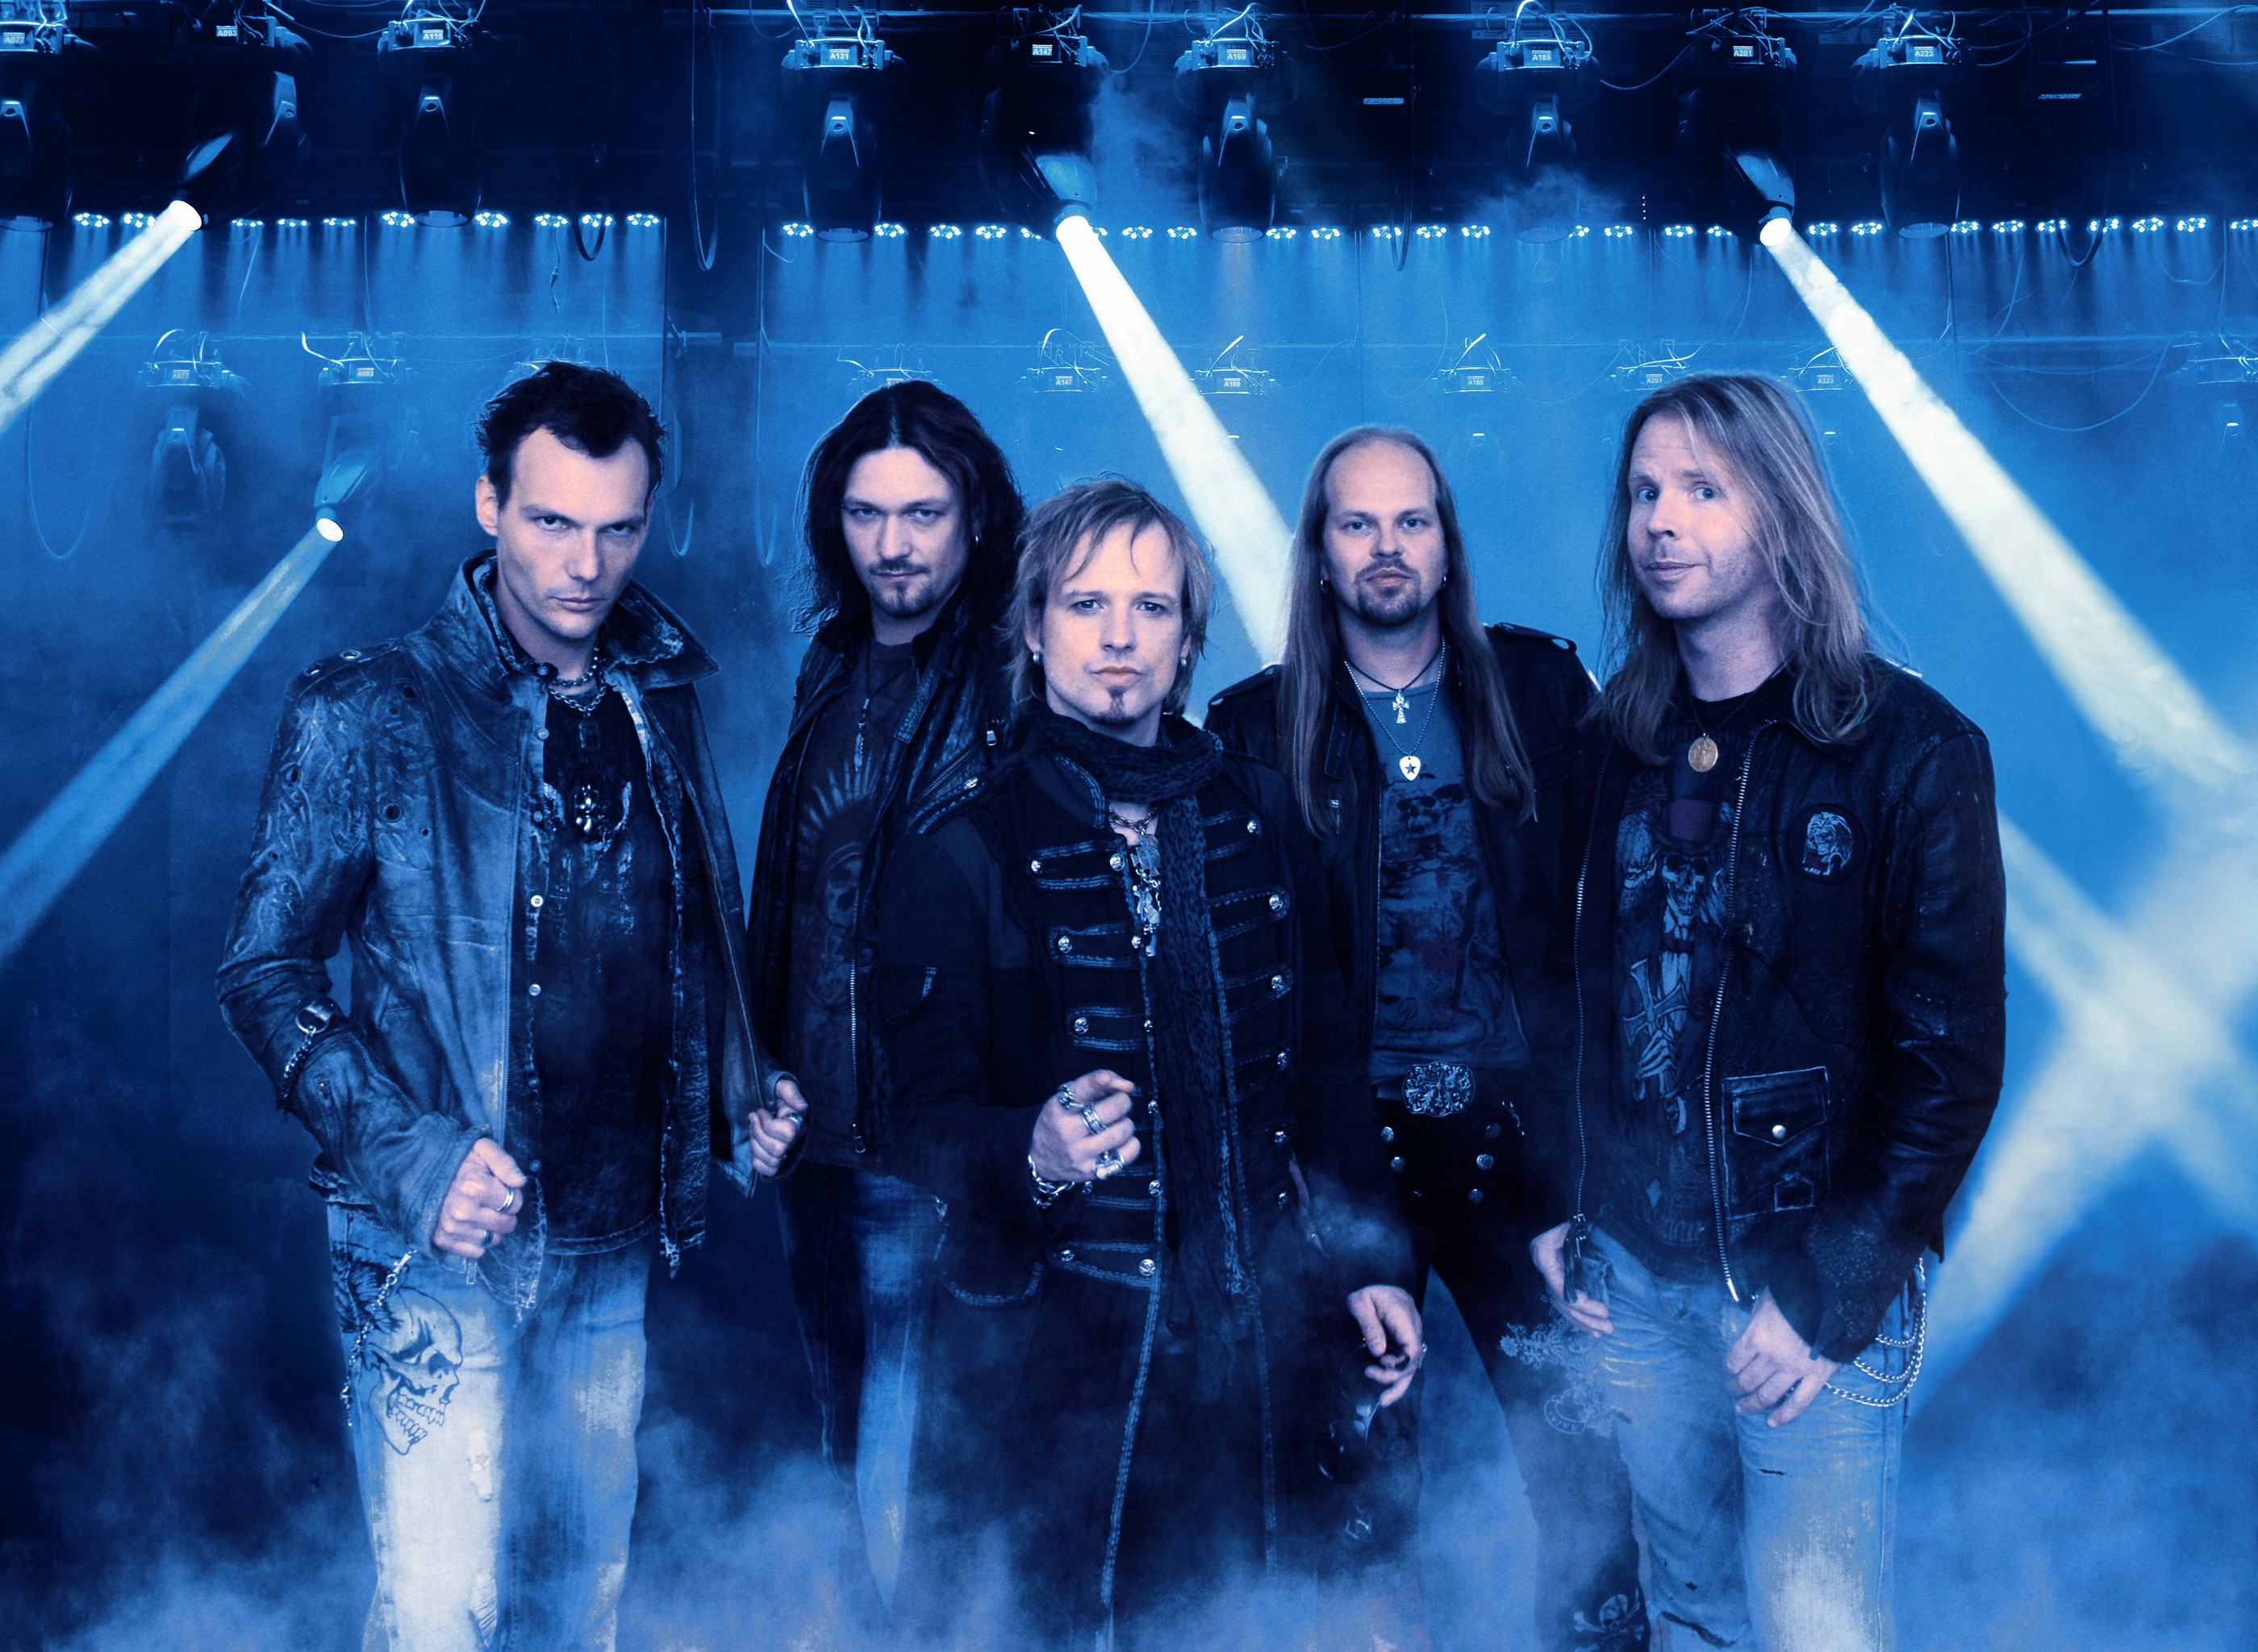 Edguy | Dirk talks about memories, heavy metal and staying together